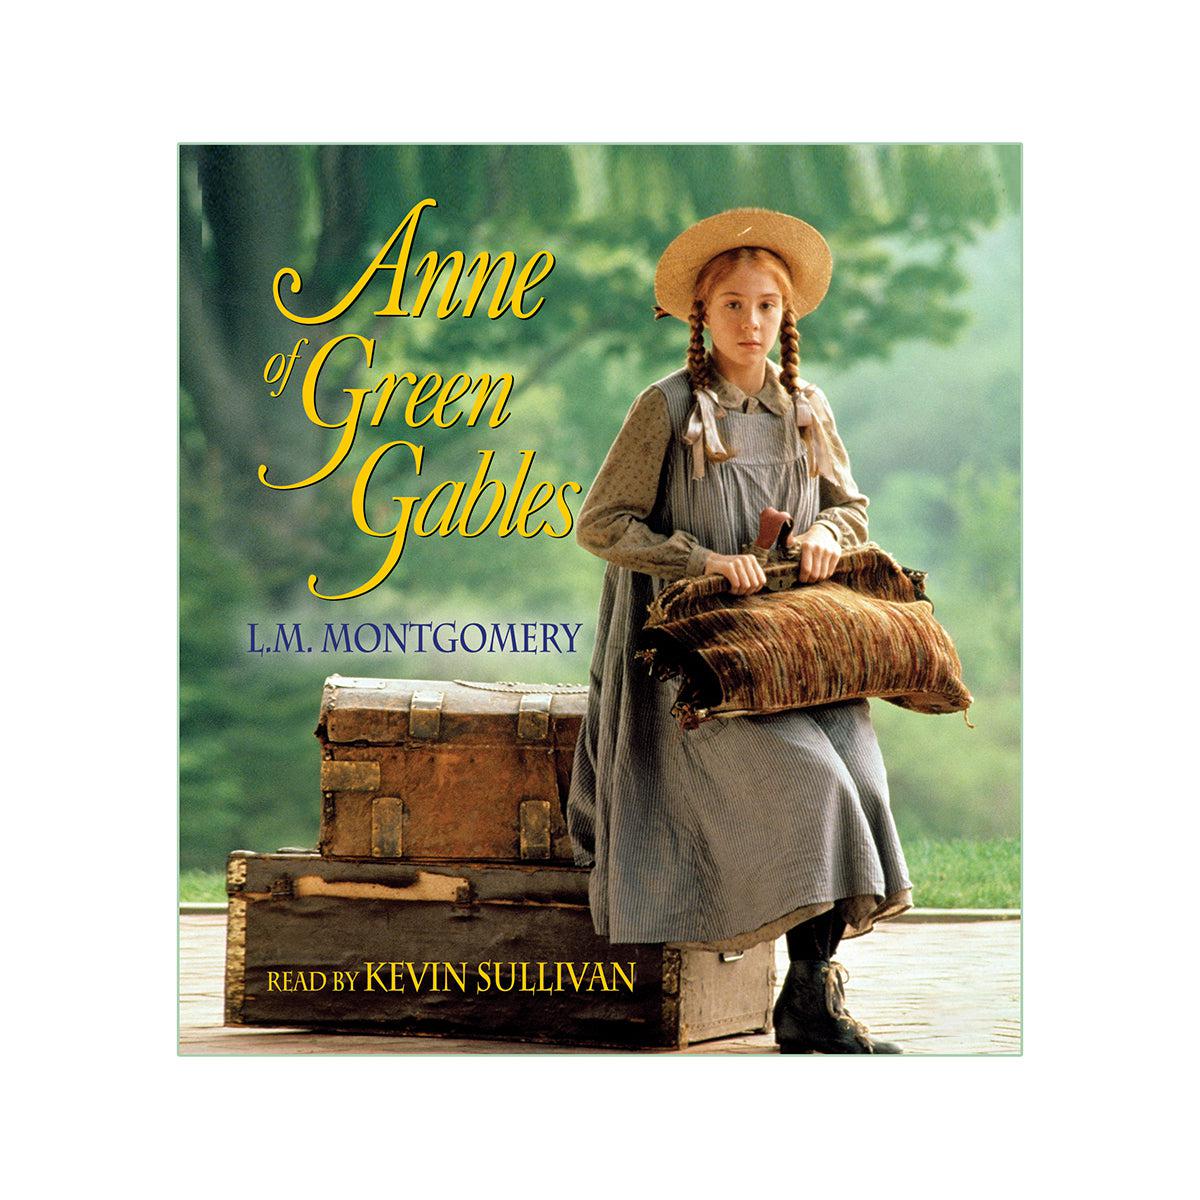 "Anne of Green Gables" Audiobook Read by Kevin Sullivan (Download/Audible)